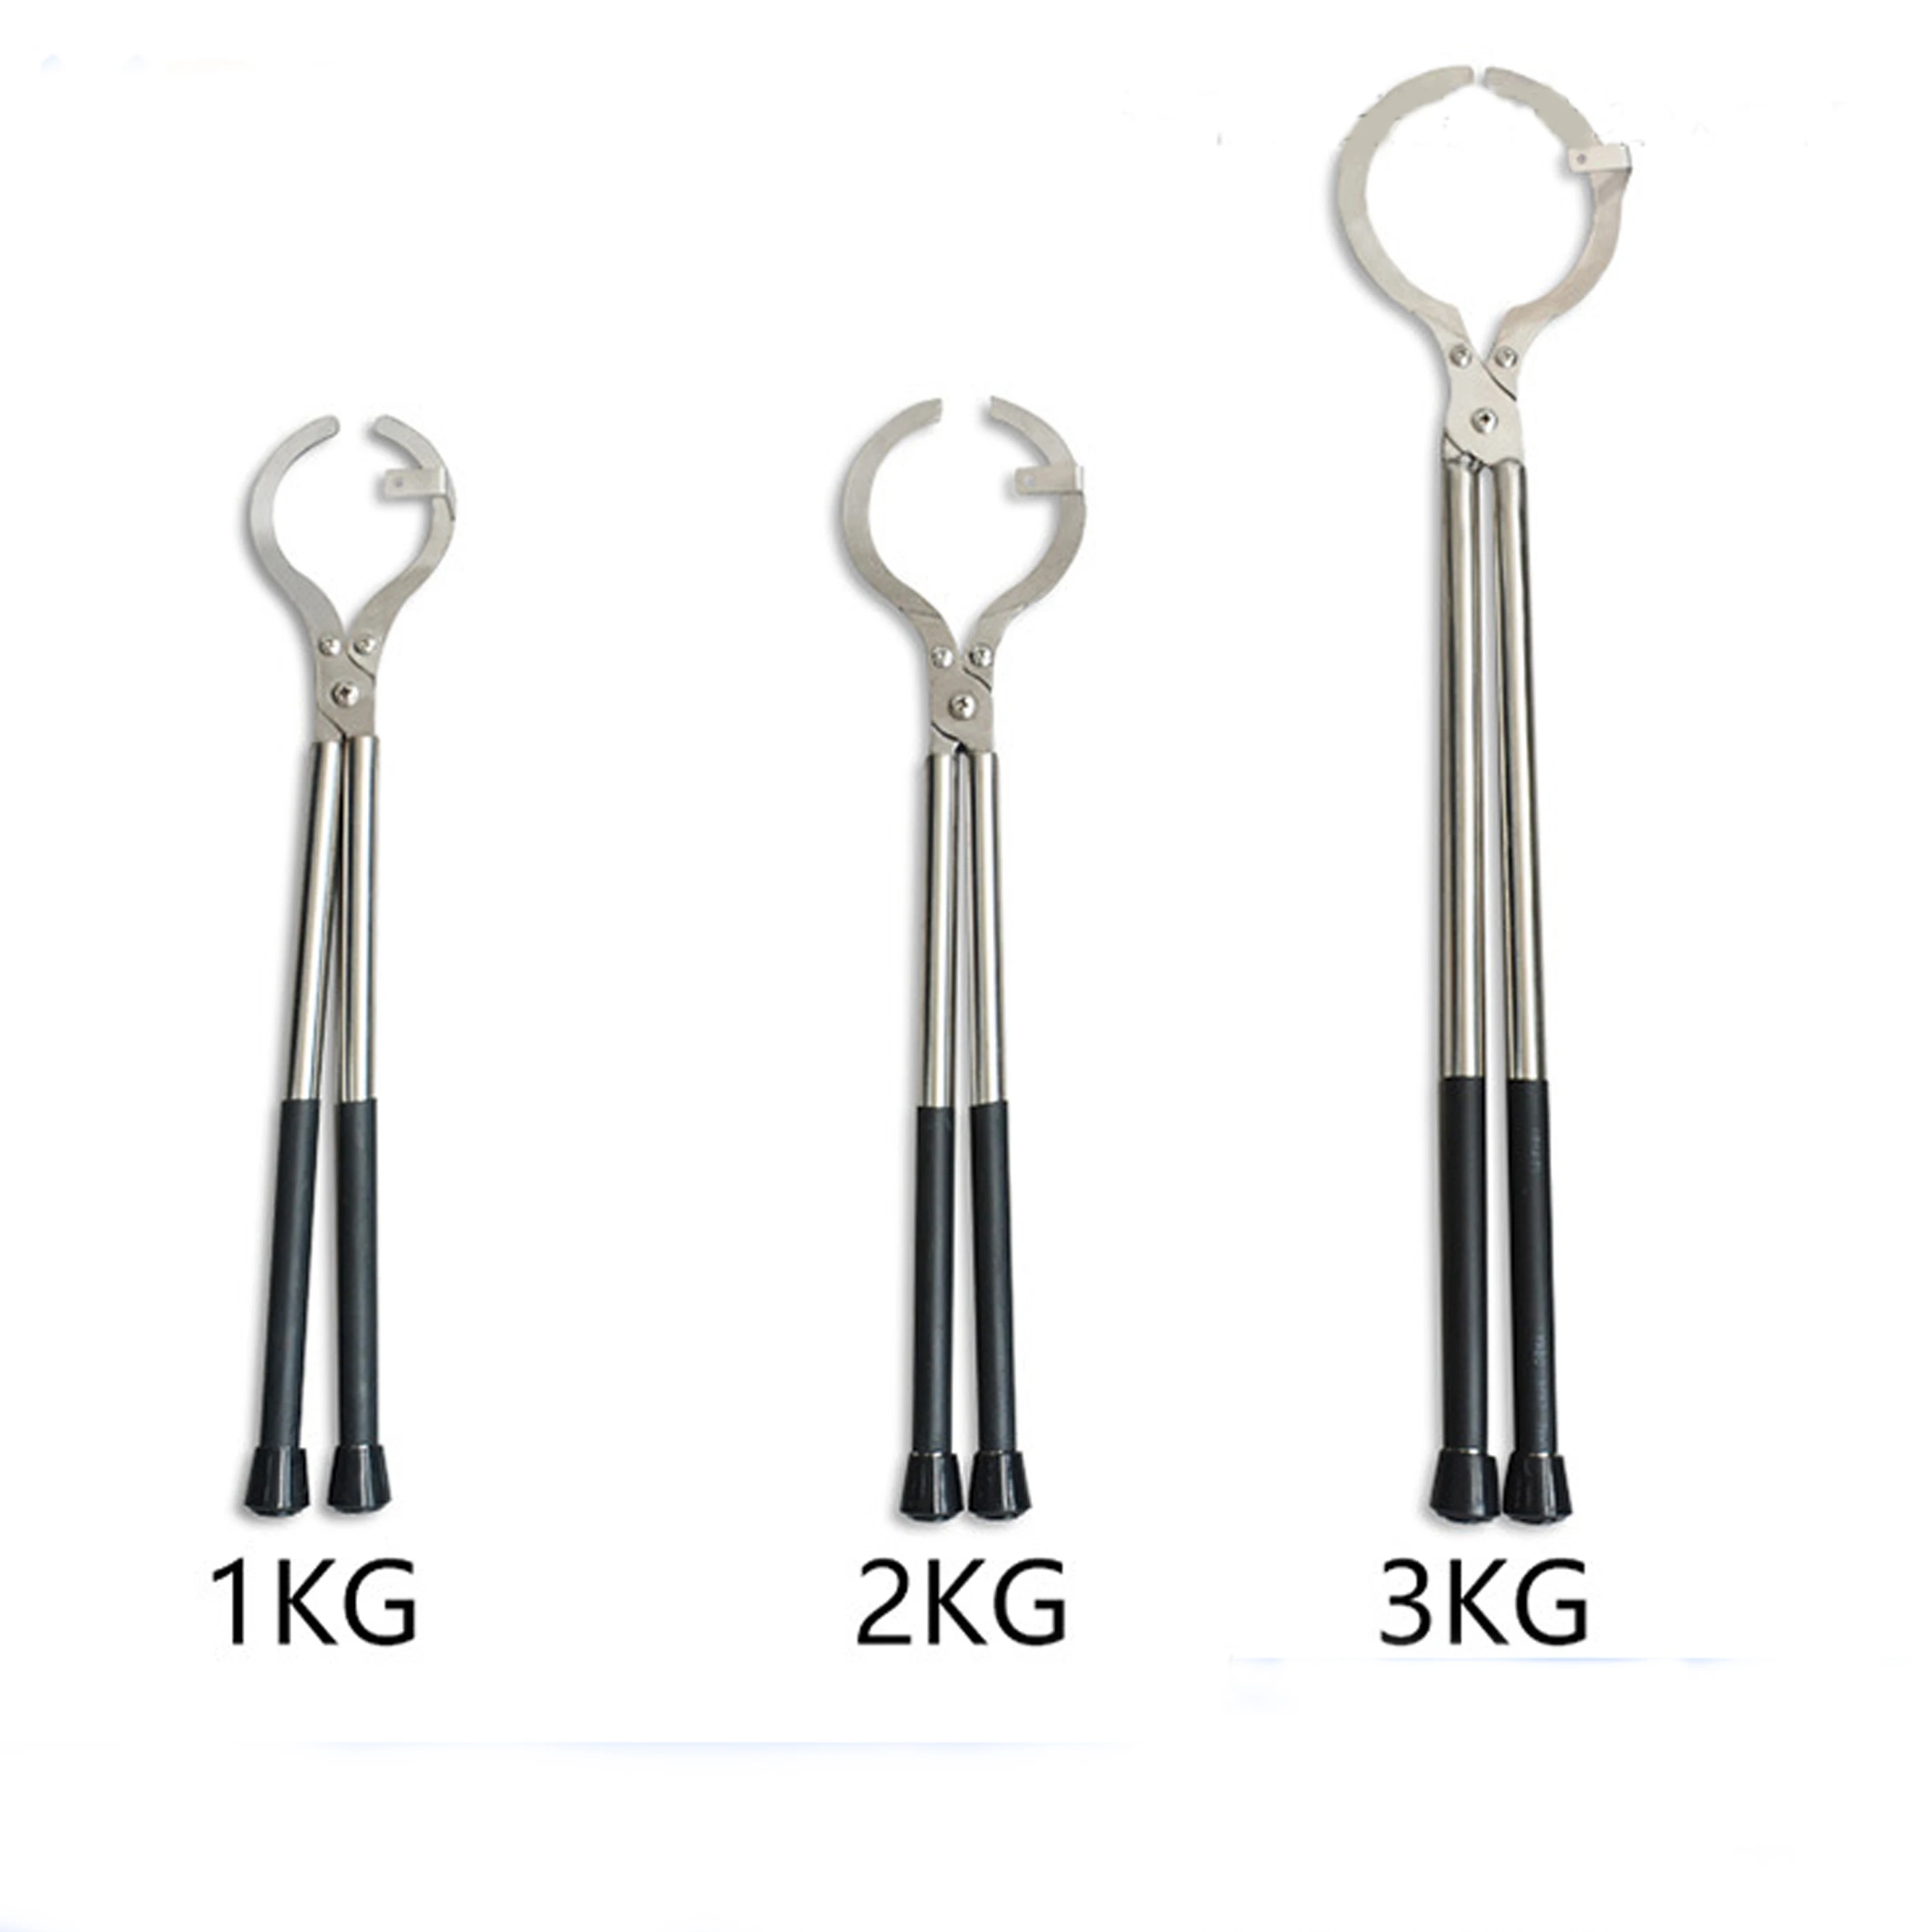 Stainless Steel Crucible Tongs 2kg Graphite Melting  Holder  Gold Melting Furnace Attachment   Jewelry Tools crucible tongs for melting furnace jewelry casting machine graphite crucible holder plier melting tools